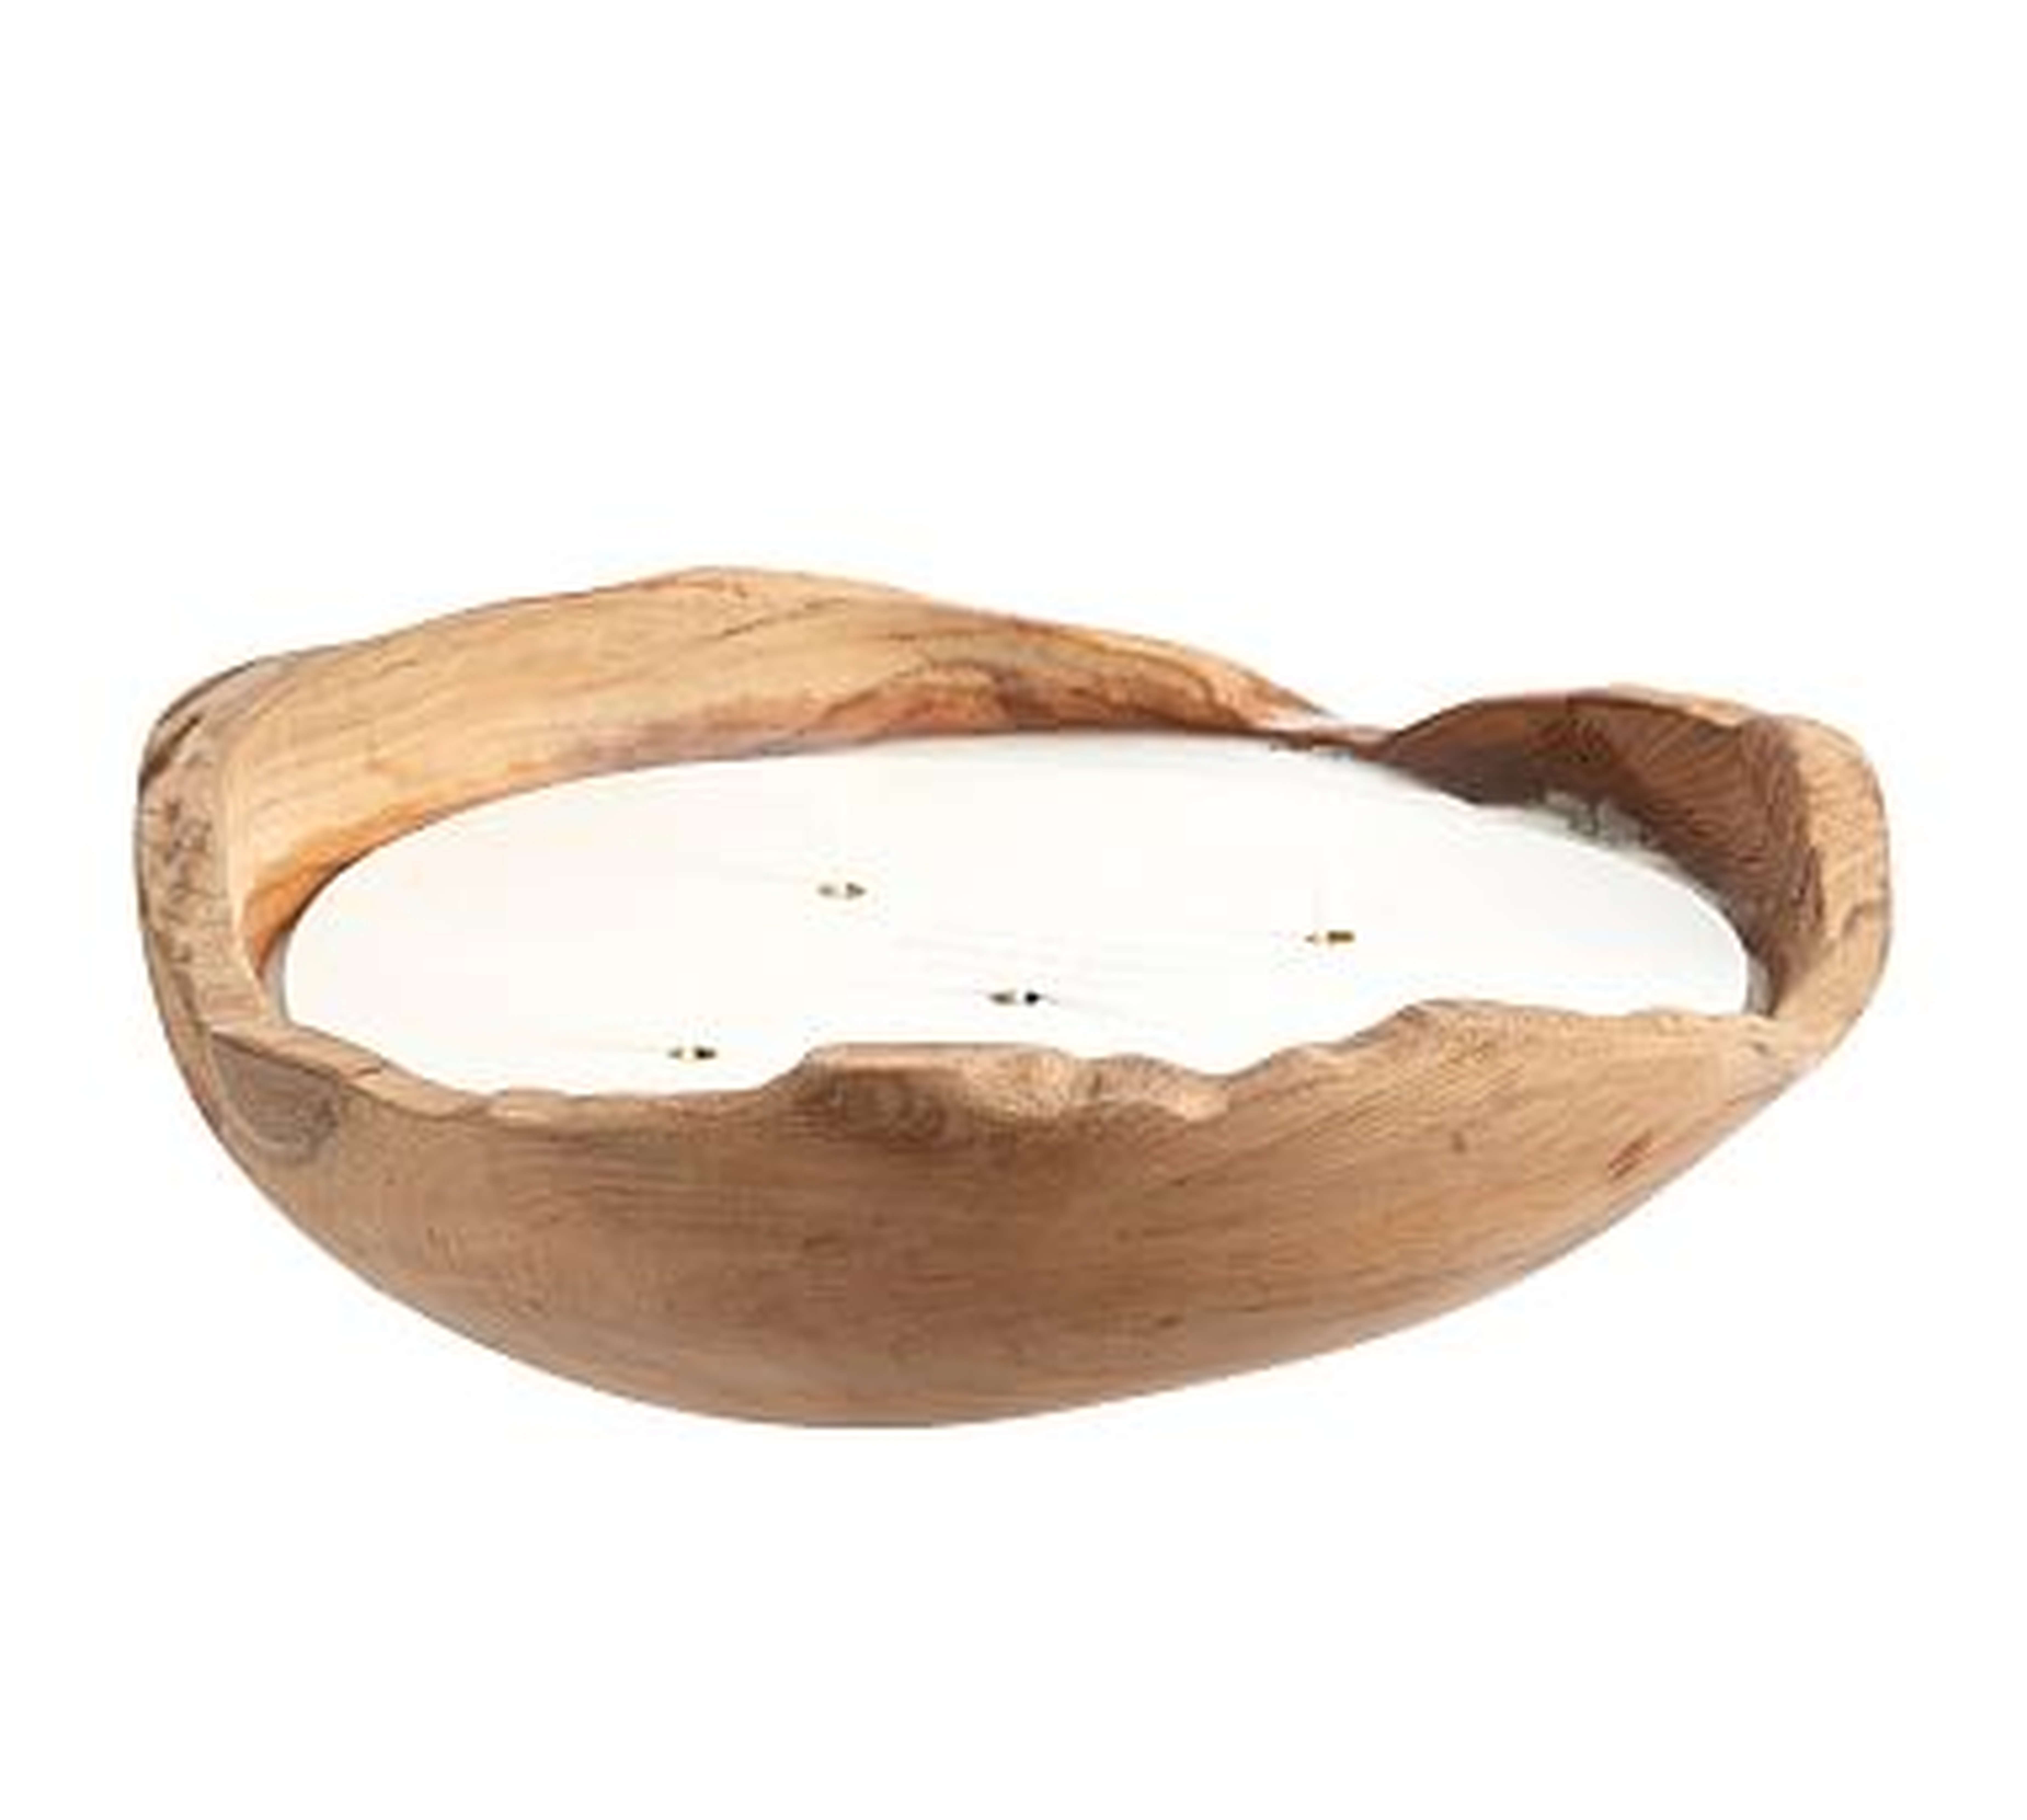 Wooden Bowl Scented Candle, Autumn Lodge, Large - Pottery Barn